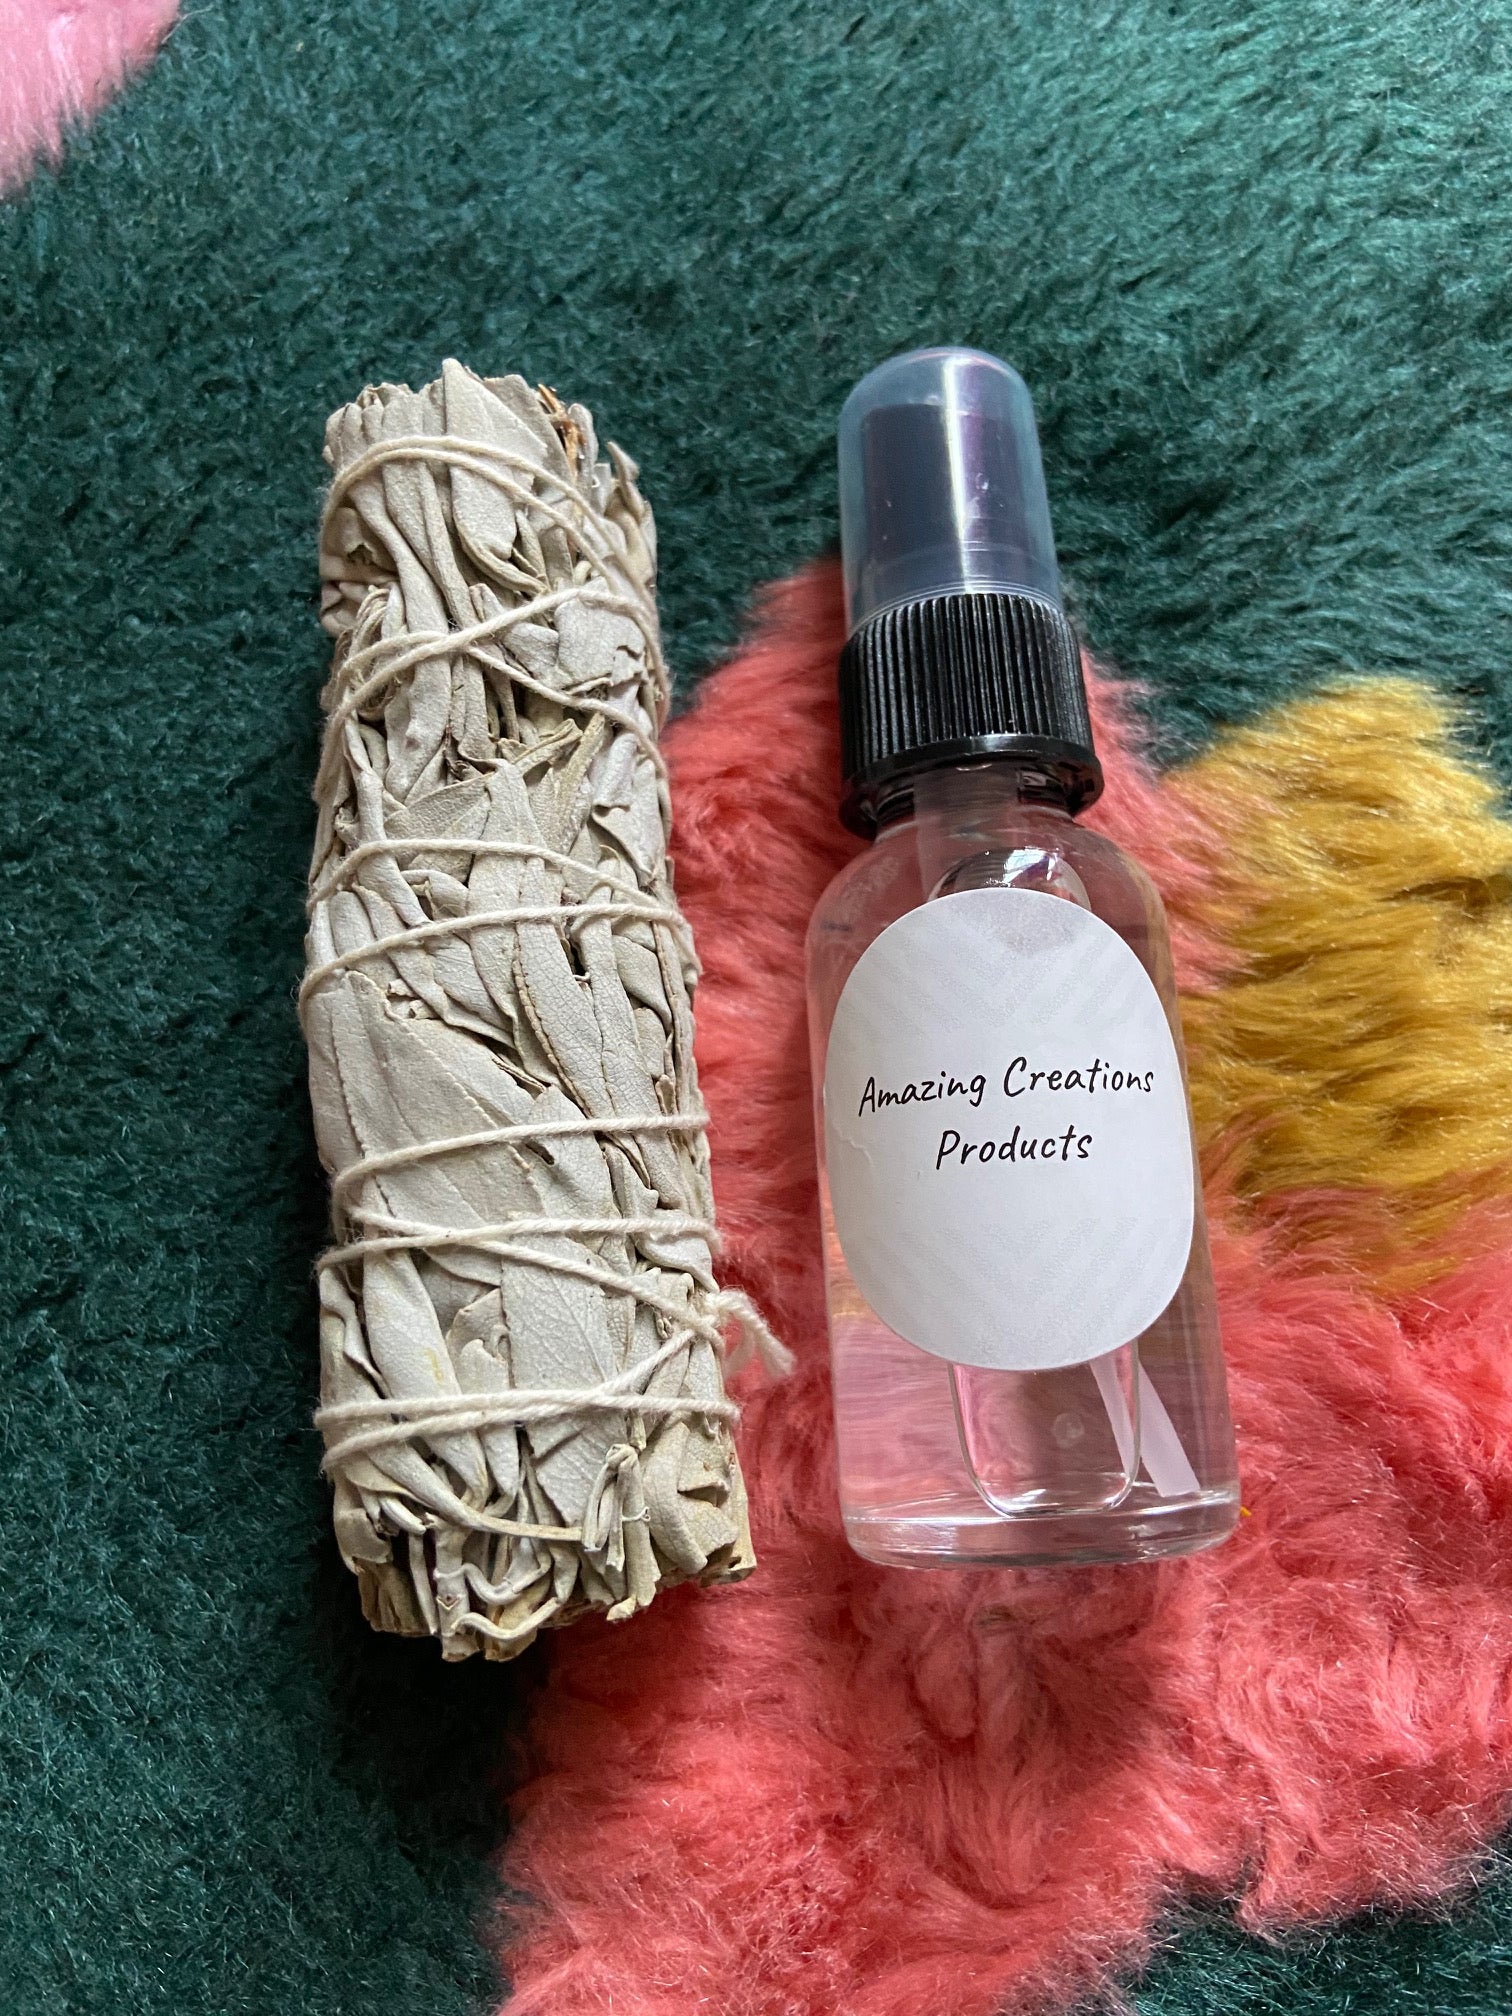  White Sage & Lavender Smudge Spray -  available at Amazing Creations Products . Grab yours for $8.00 today!